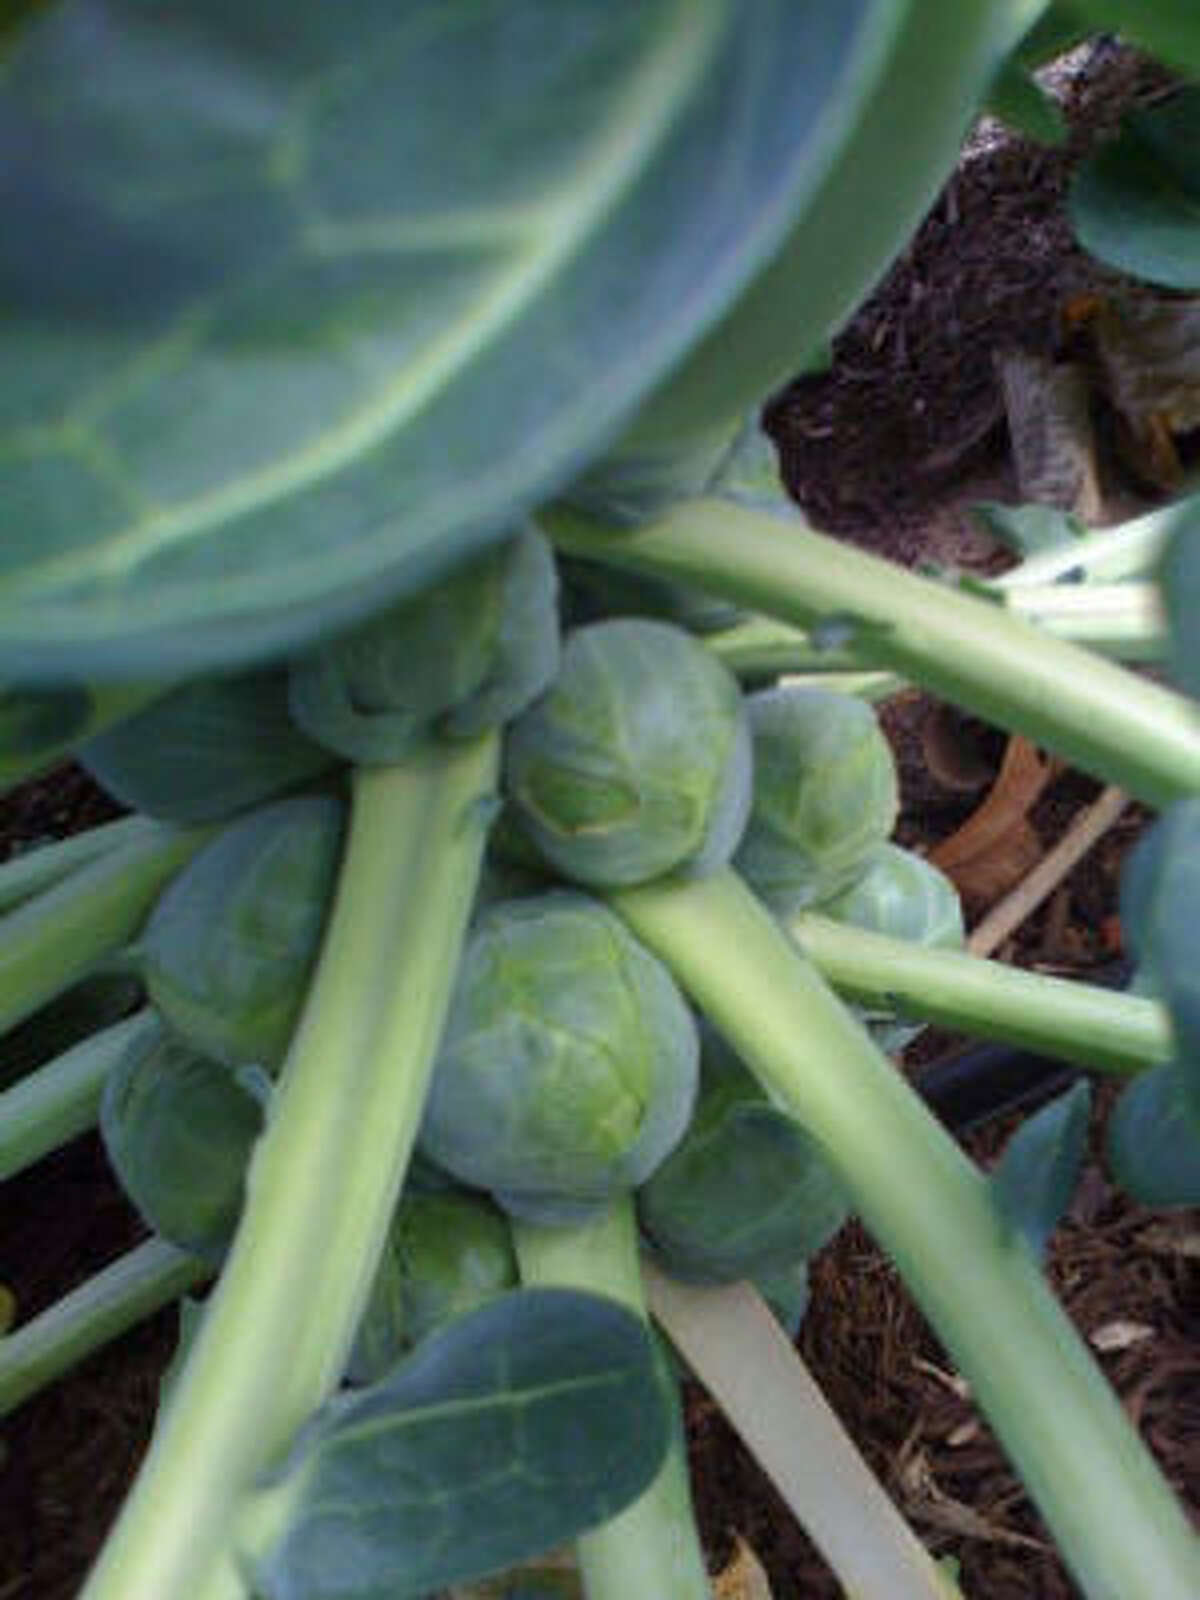 Brussels sprouts More: Story |Vegetable & herb garden inspirations | Search database vegetables | HoustonGrows.com